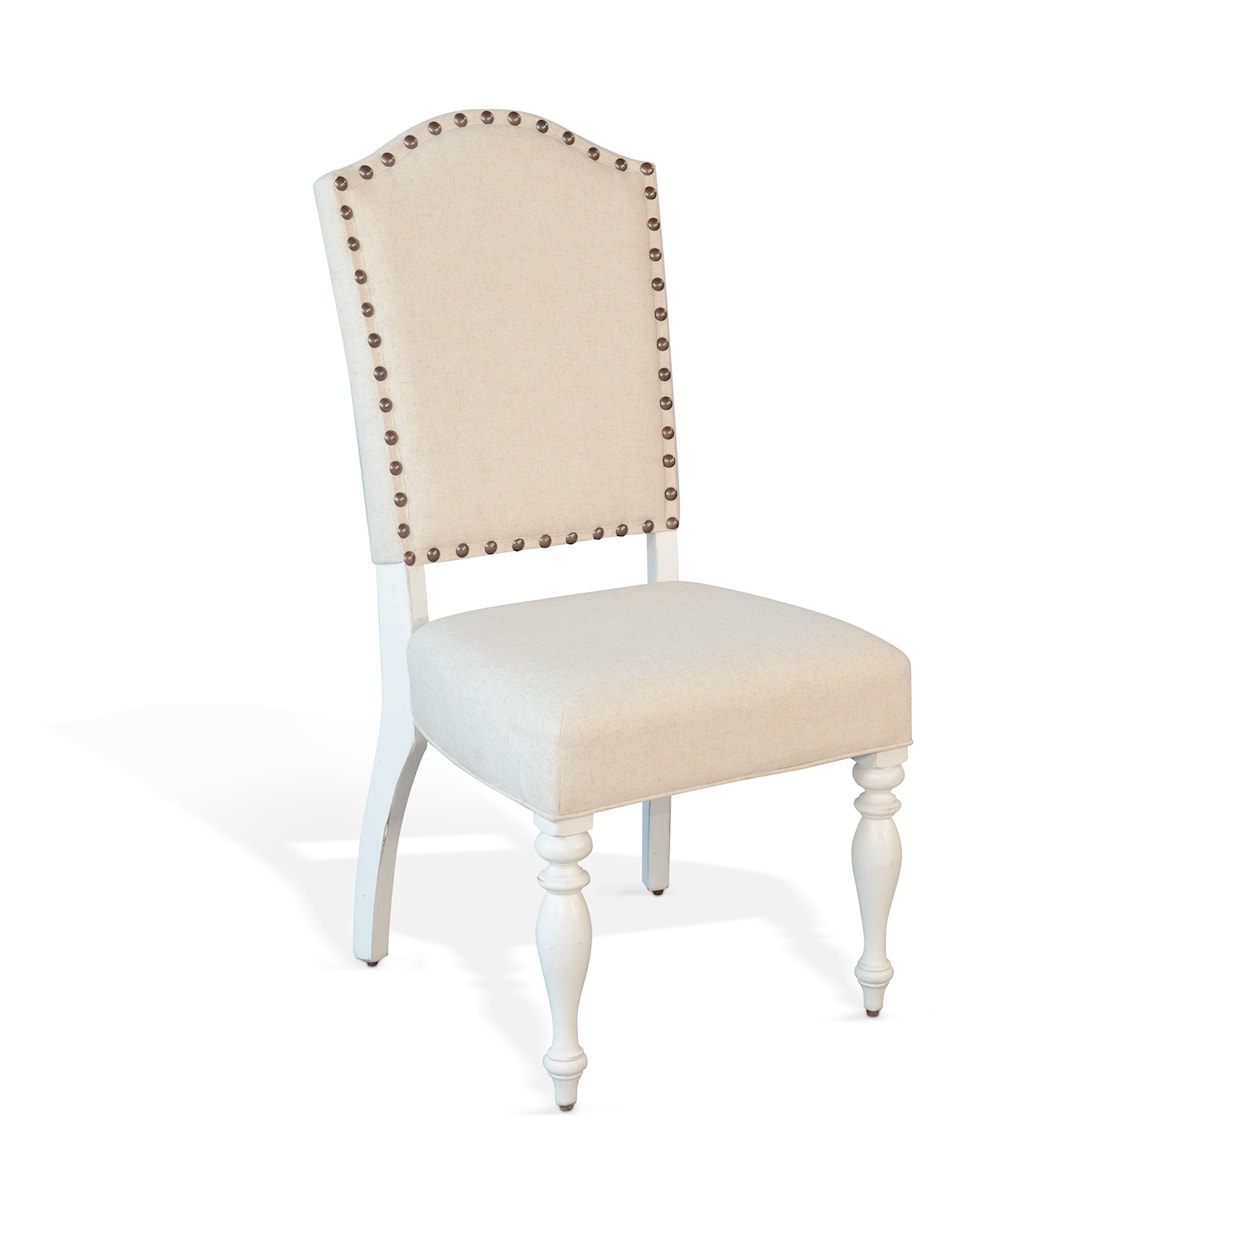 Sunny Designs Carriage House Chair, Cushion Seat & Back